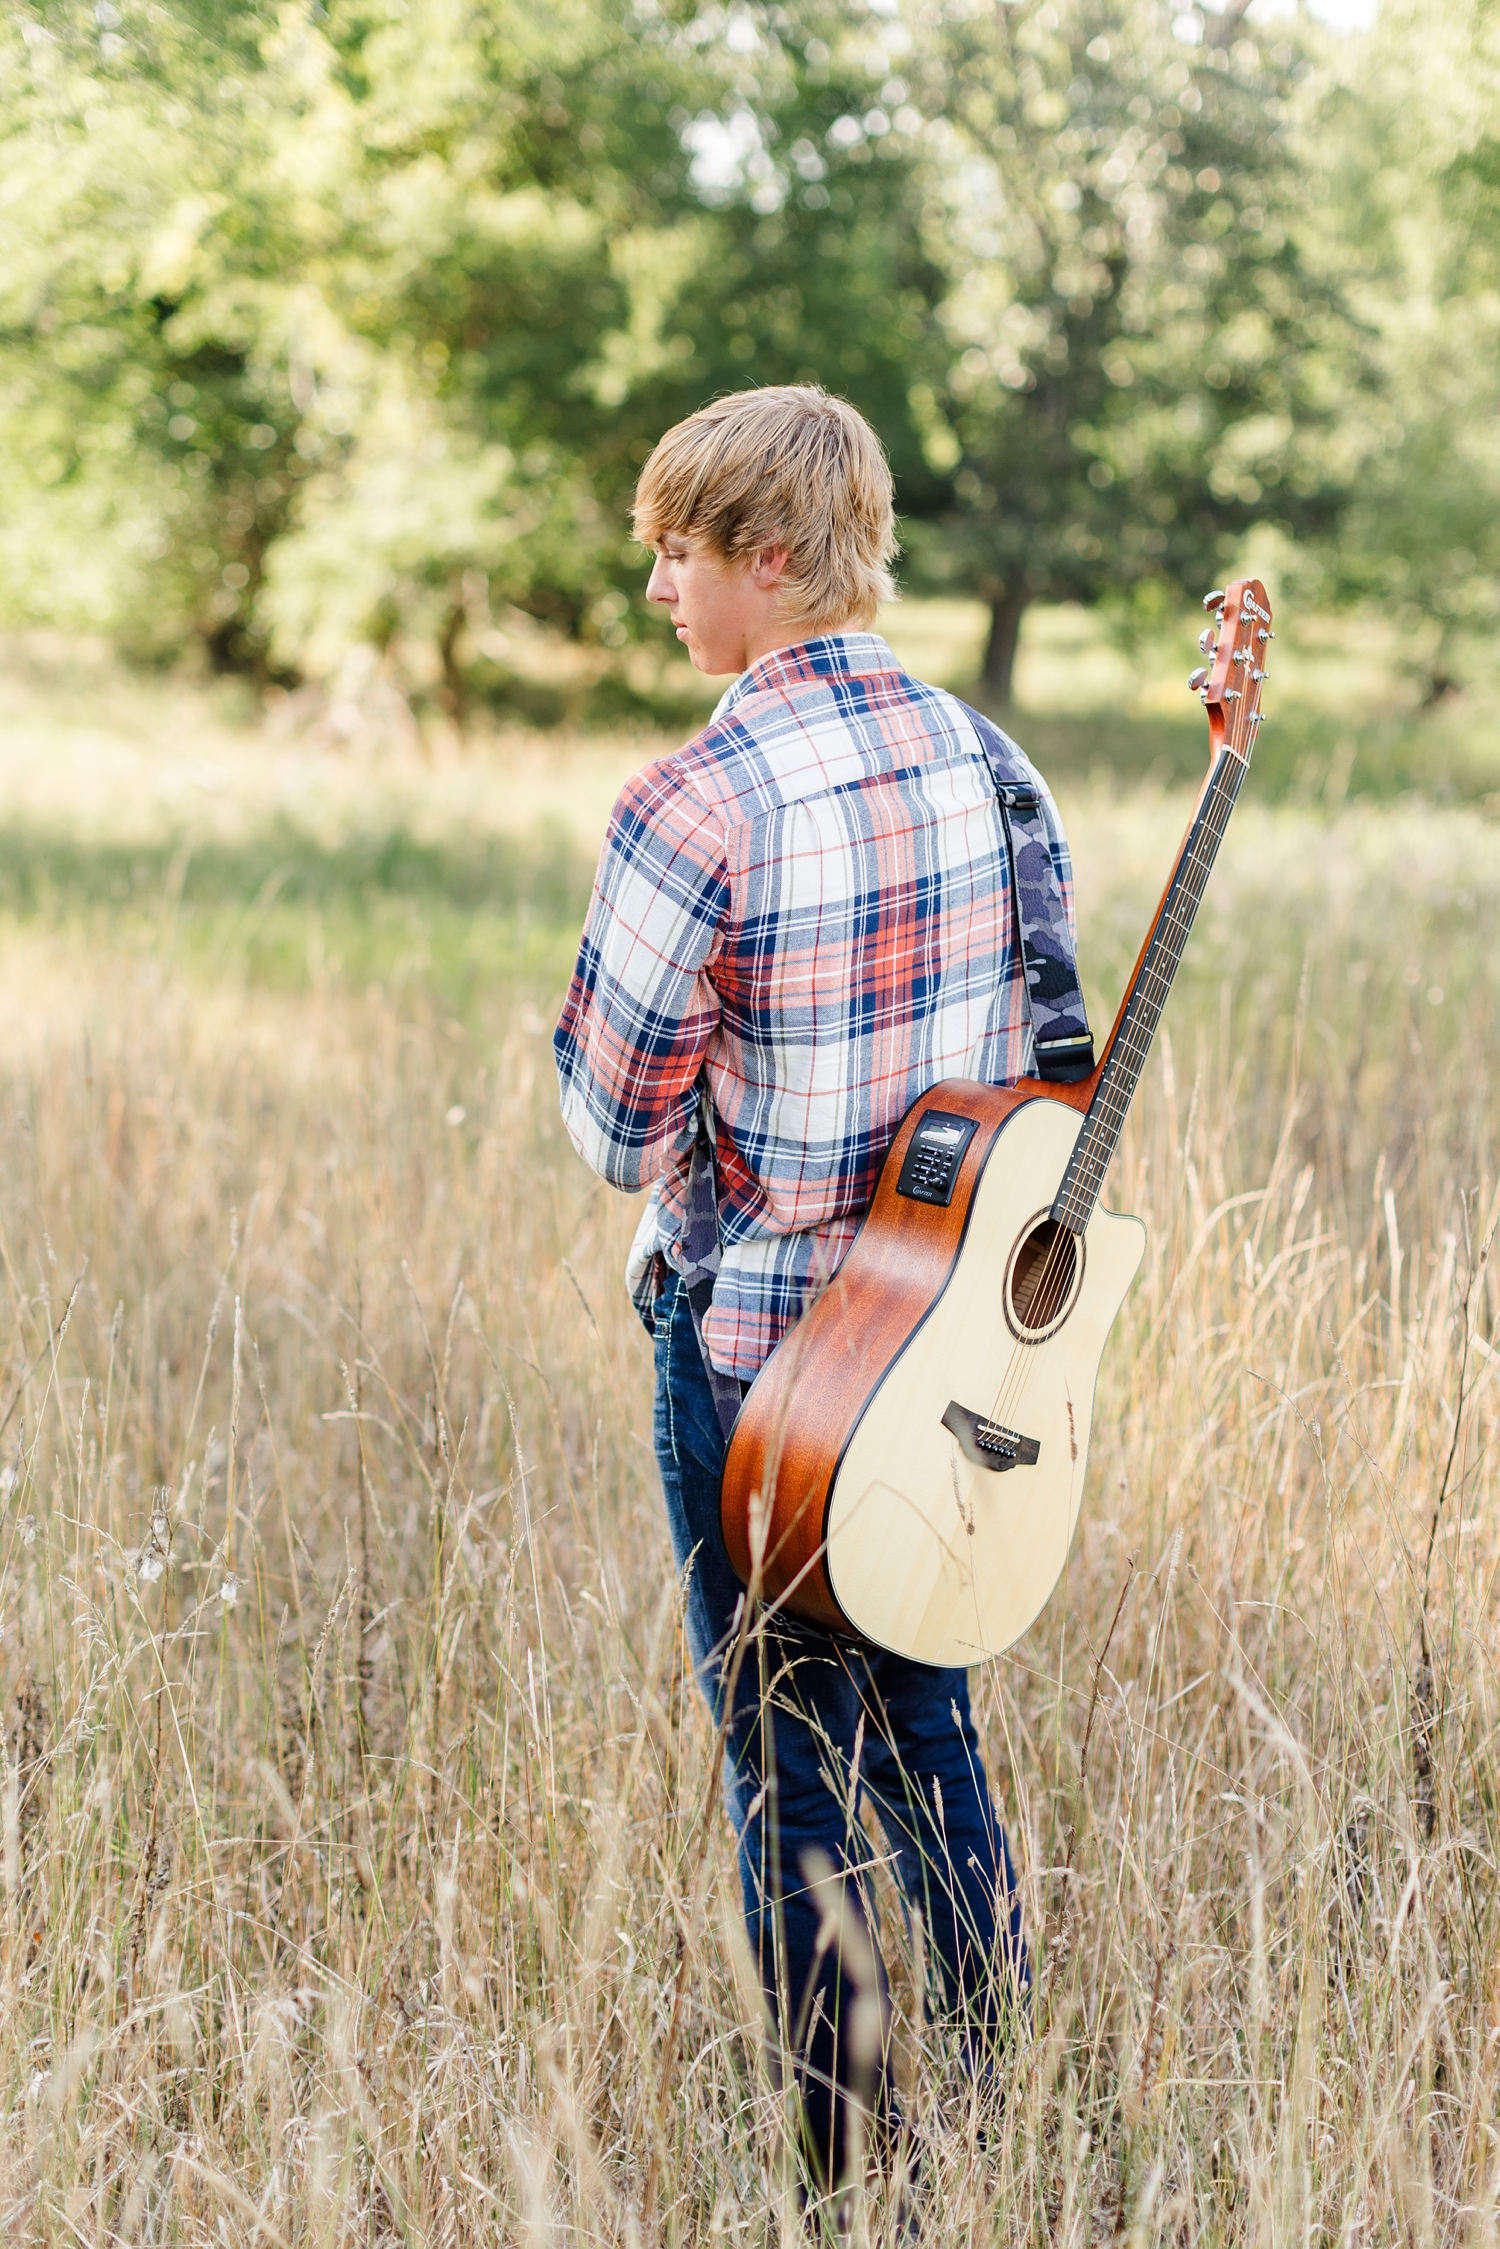 Justin stands in the middle of a grassy field with his guitar strapped to his back | CB Studio